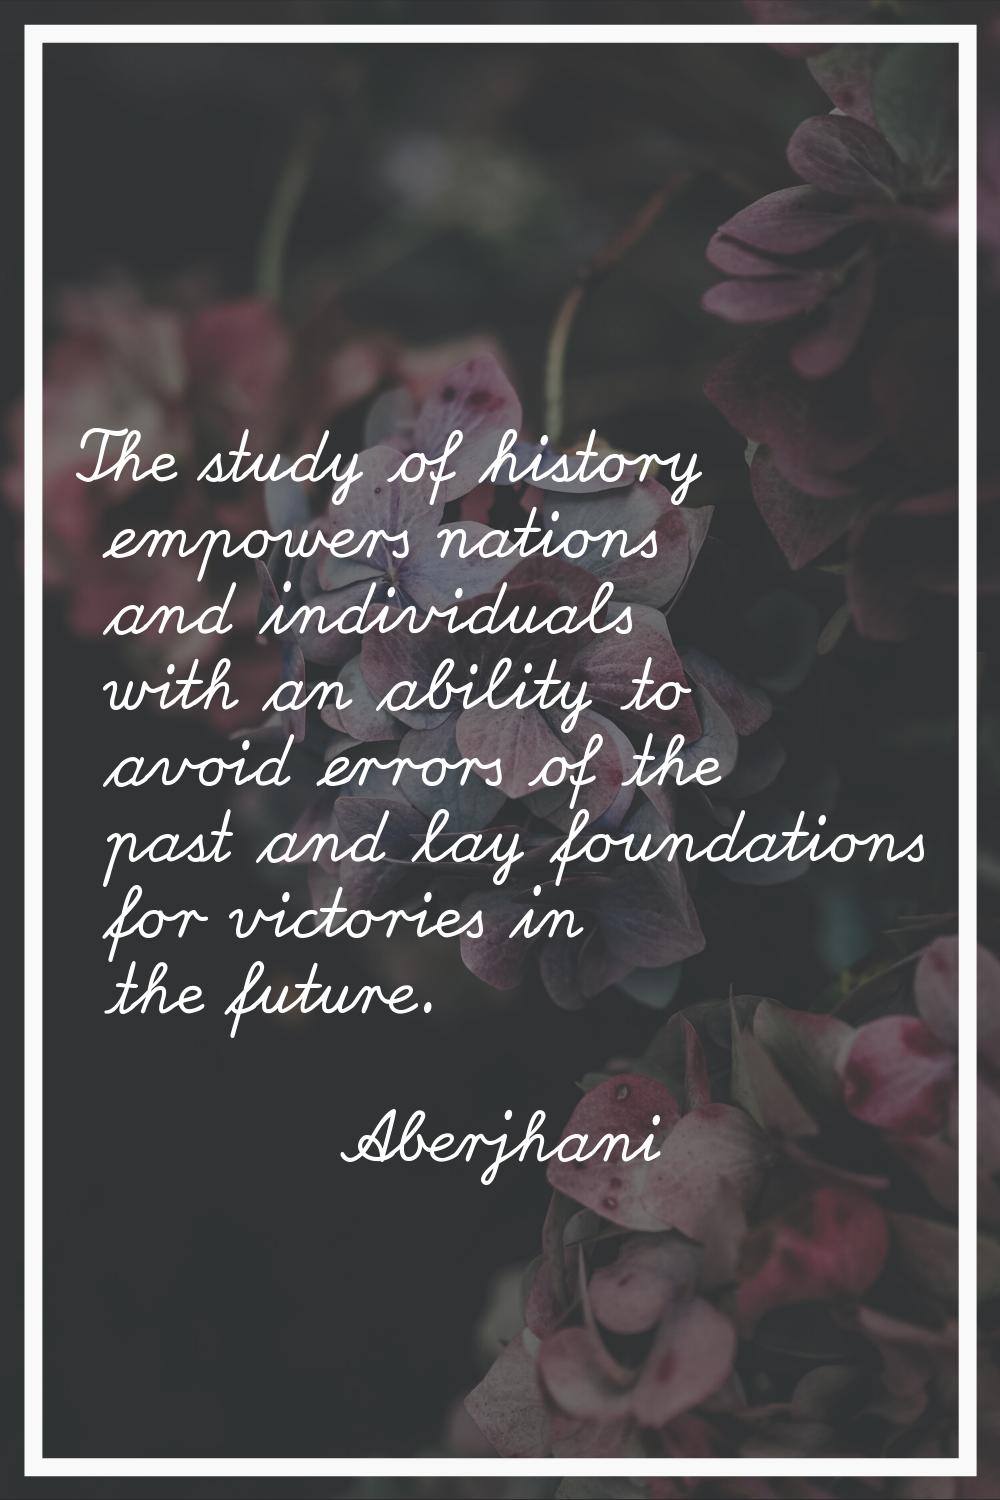 The study of history empowers nations and individuals with an ability to avoid errors of the past a